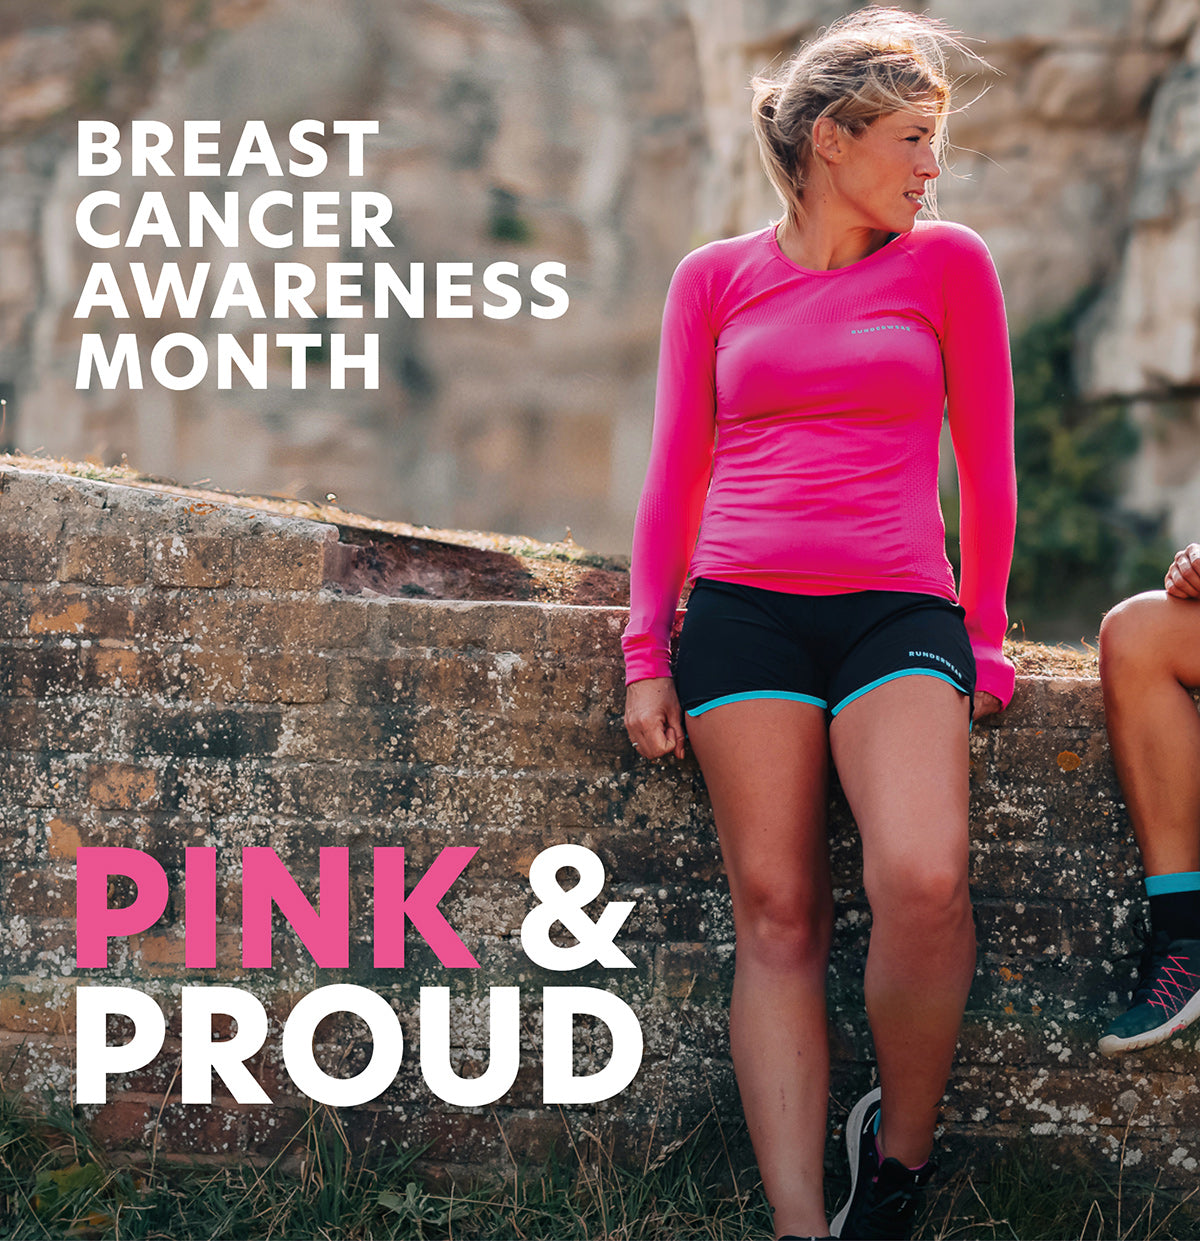 Breast Cancer awareness month- pink & proud